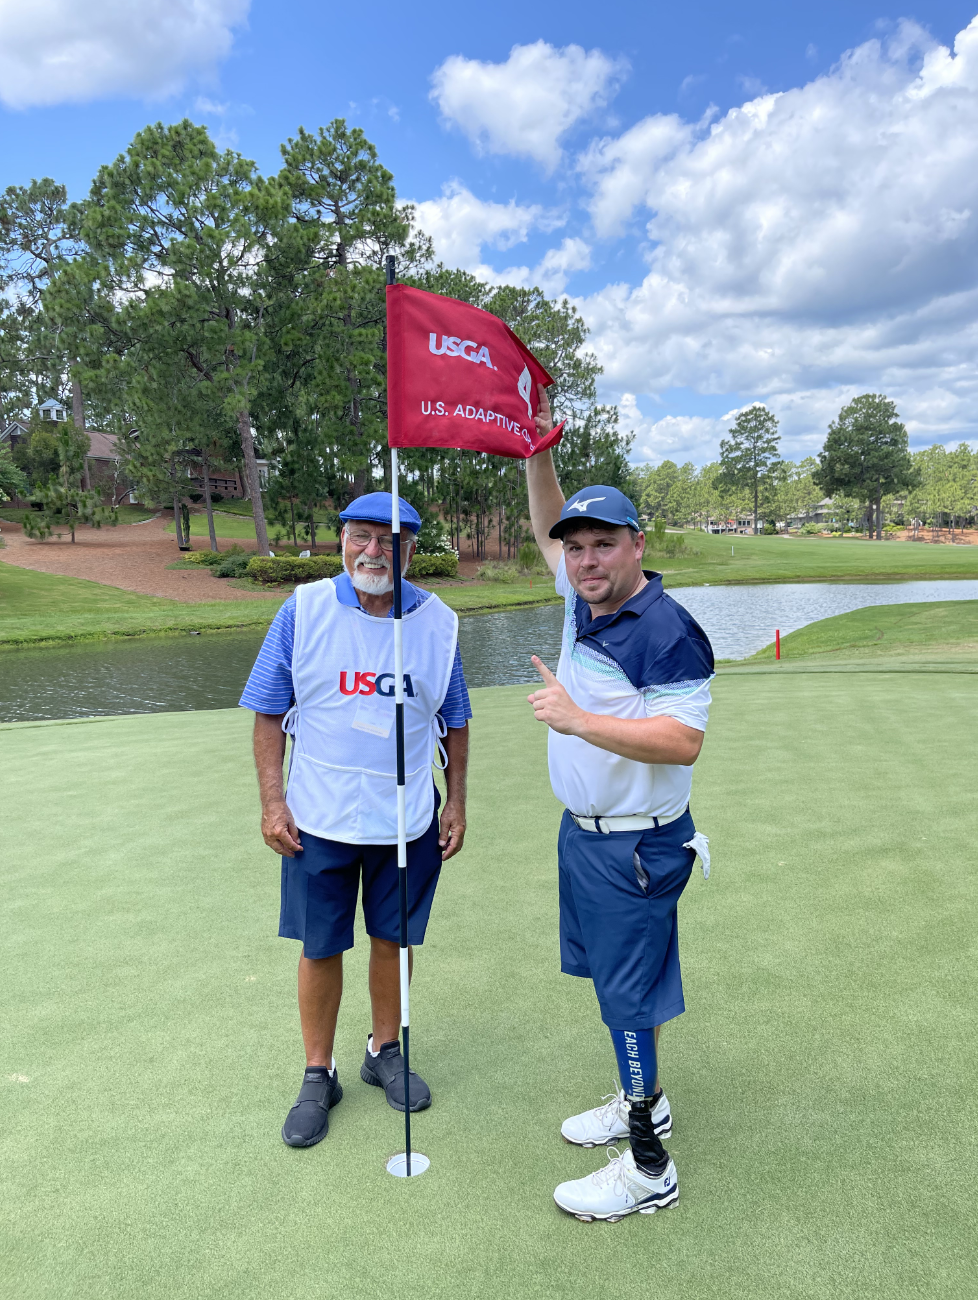 Amputee Jeremy Bittner records first ace at inaugural U.S. Adaptive Open at Pinehurst No. 6